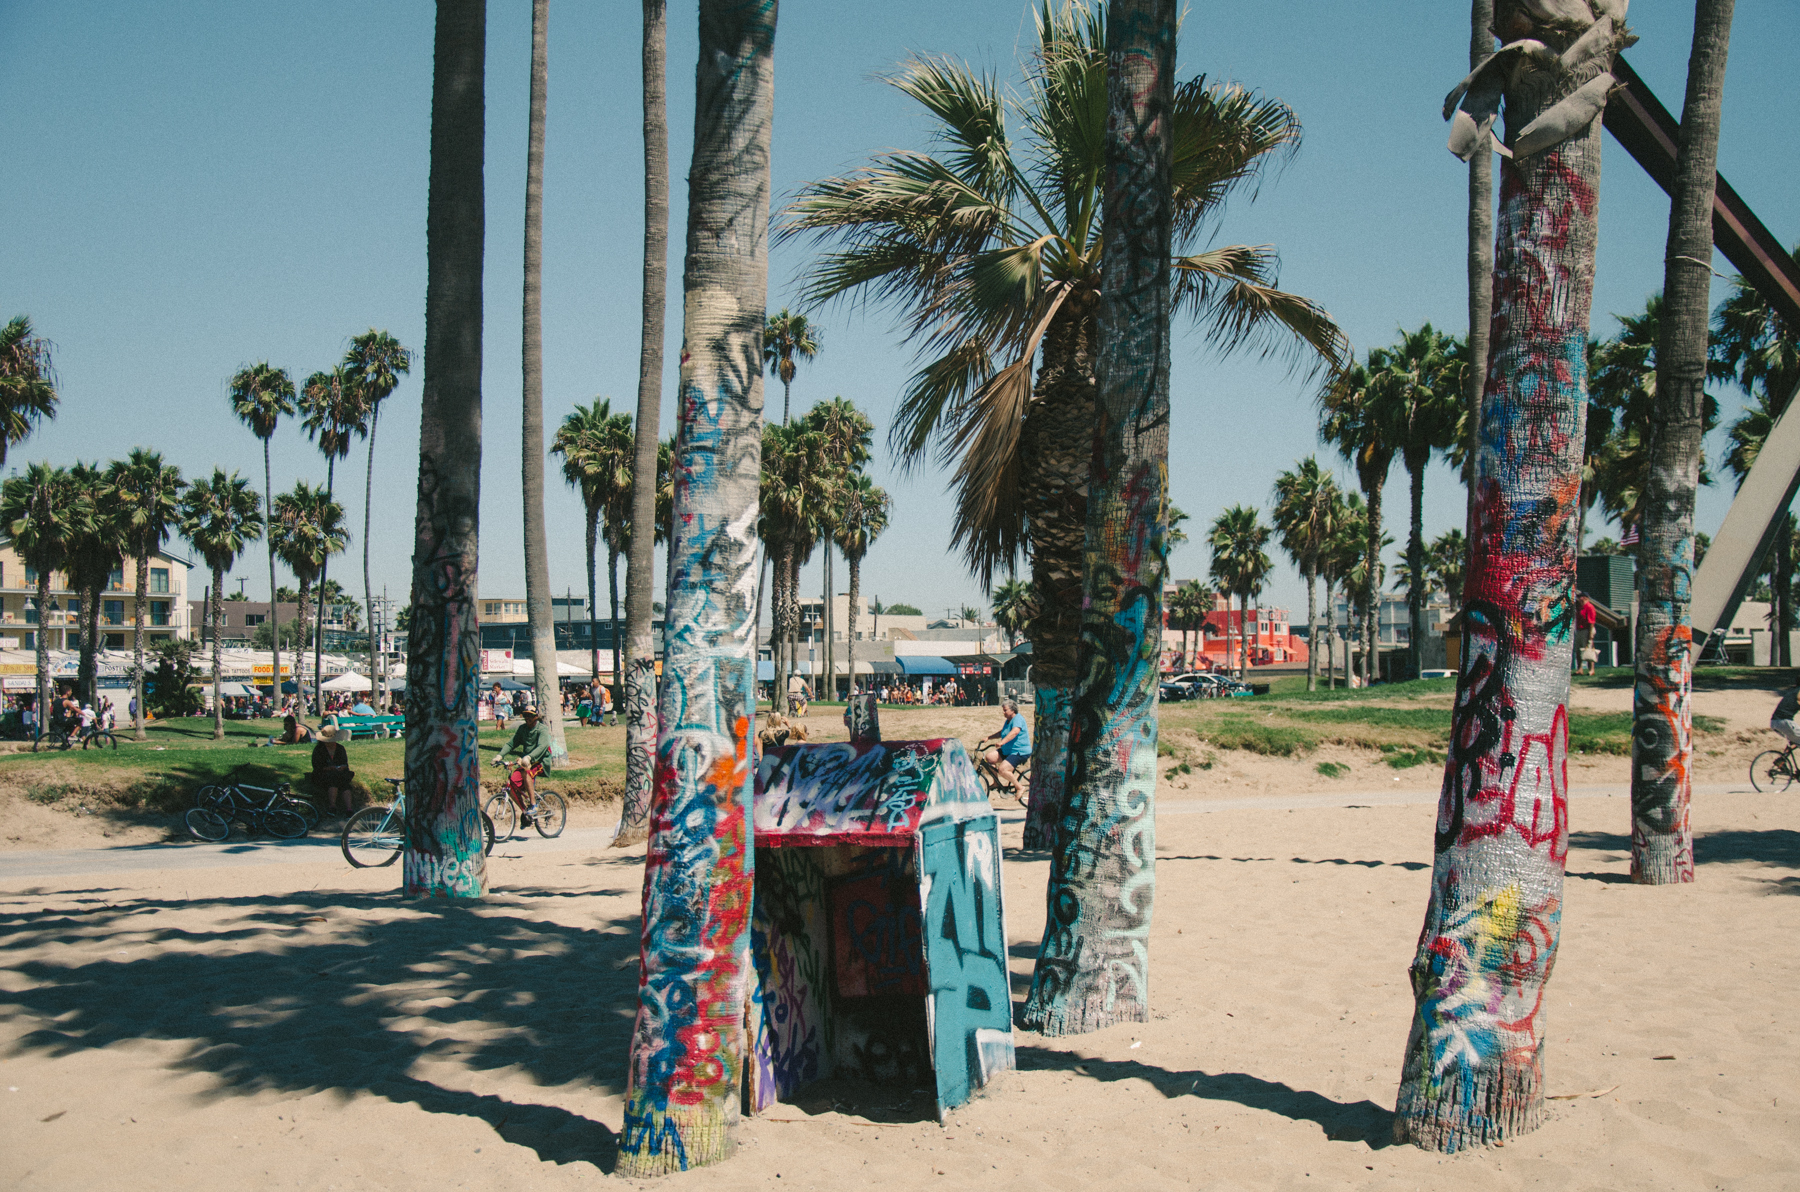 In Los Angeles, even the palm trees are covered in graffiti. 